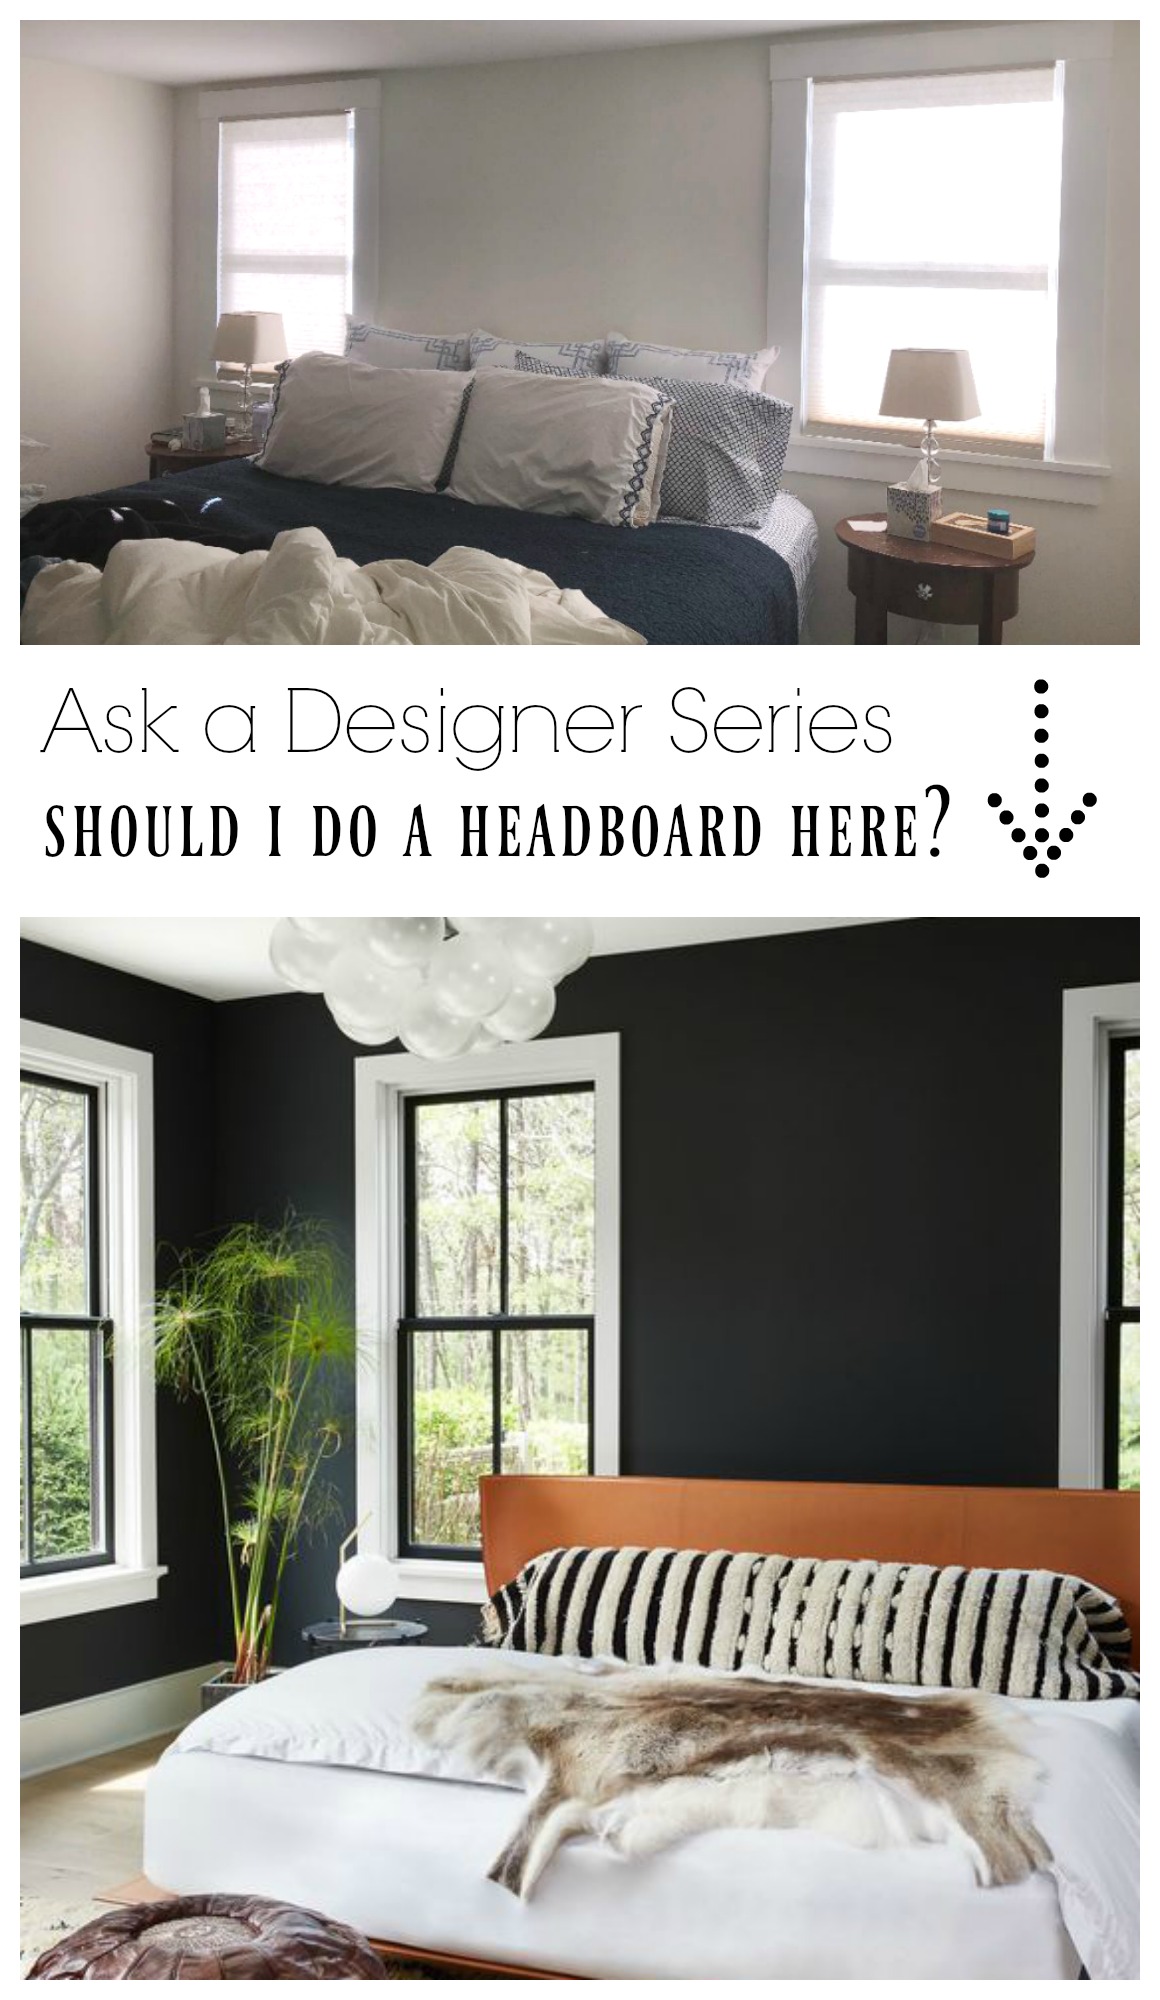 Ask a Designer Series- Should I do a headbaord between these two Windows?